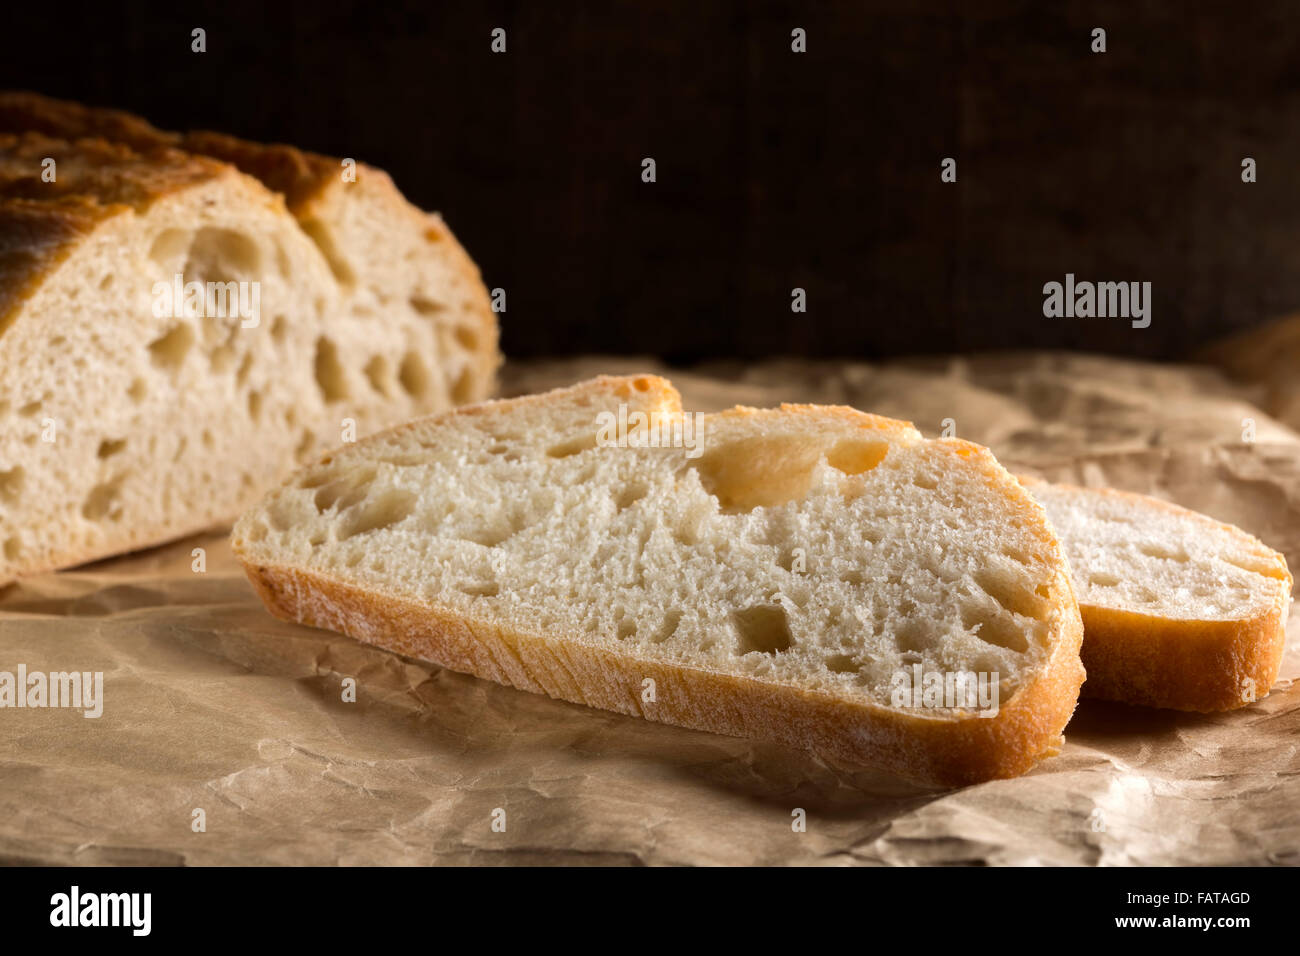 Sliced fresh white bread with browned crust over paper Stock Photo